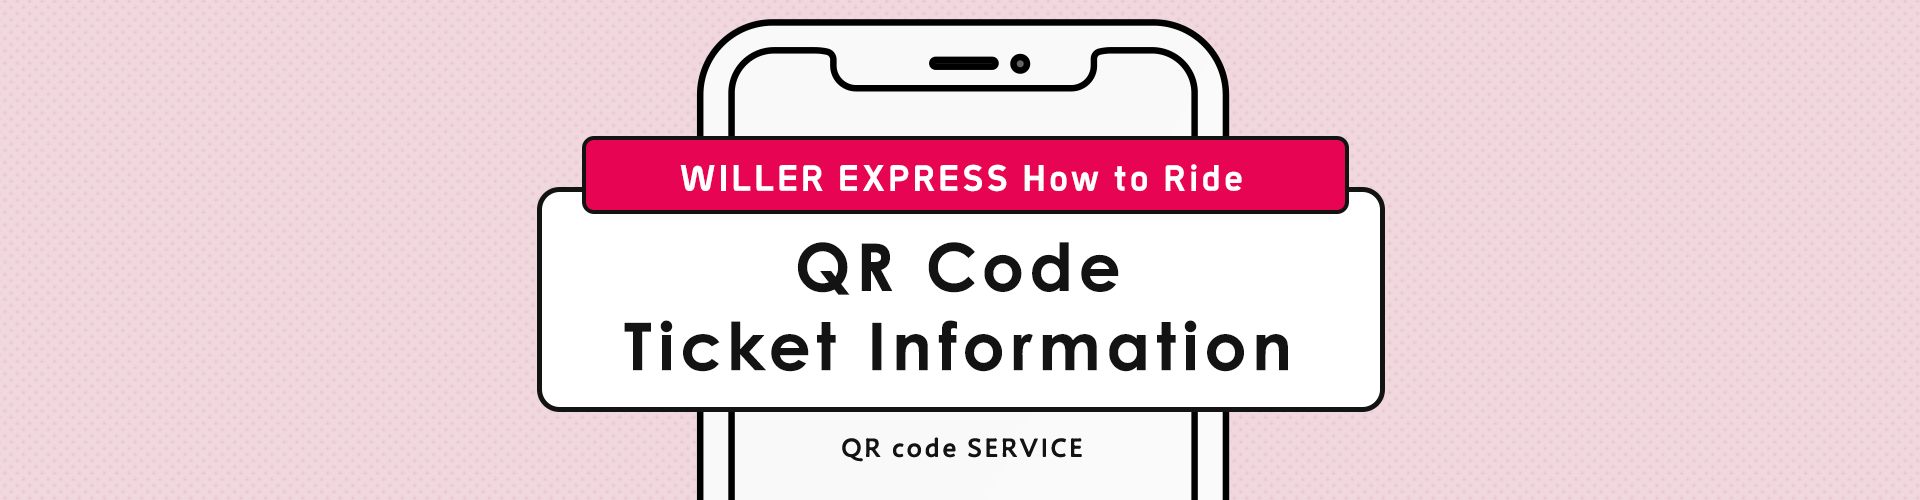 WILLER EXPRESS How to Ride QR Code Ticket Information